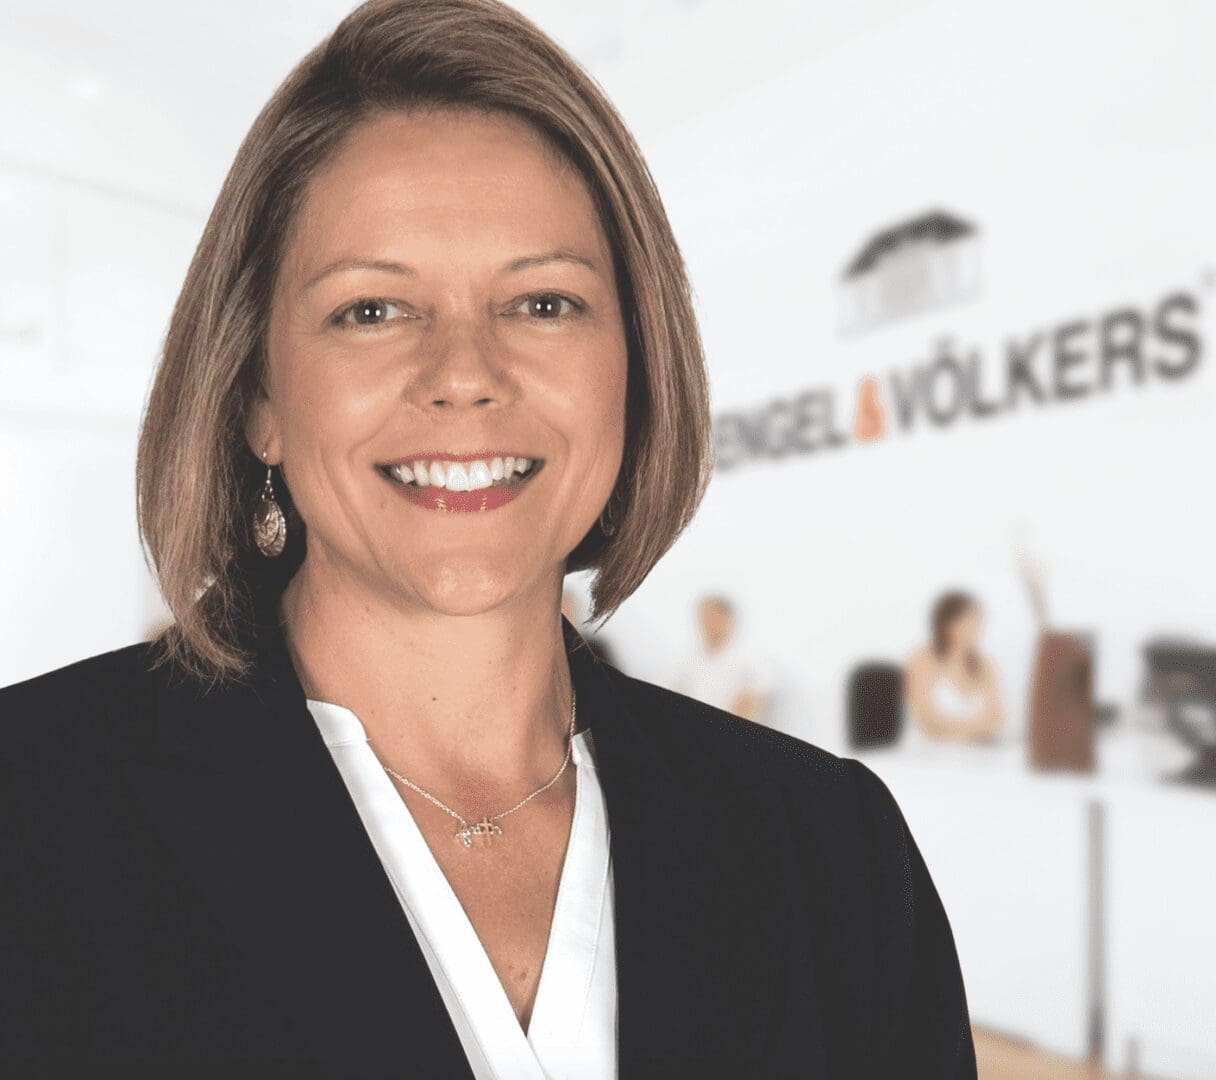 A woman in a business suit standing in front of a white wall.